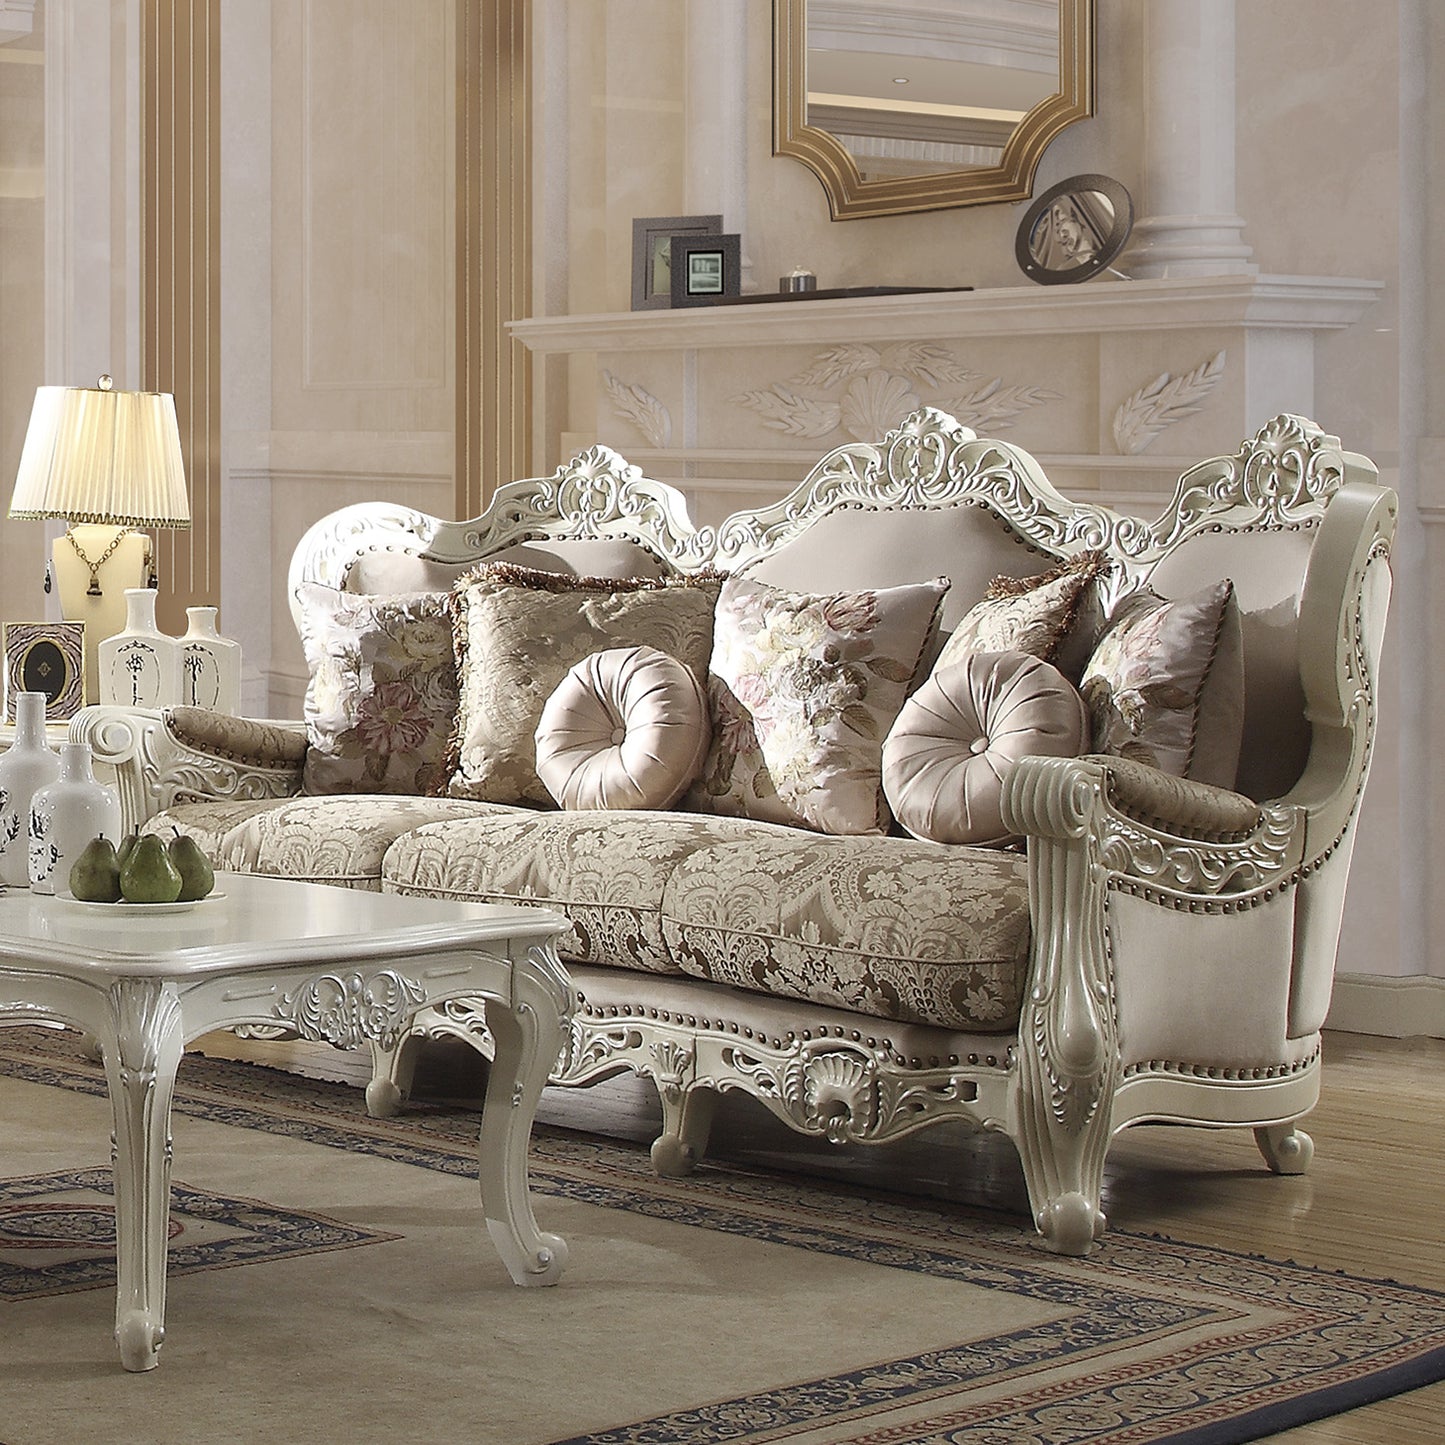 Fabric Sofa in Antique Ivory Finish S2657 European Traditional Victorian